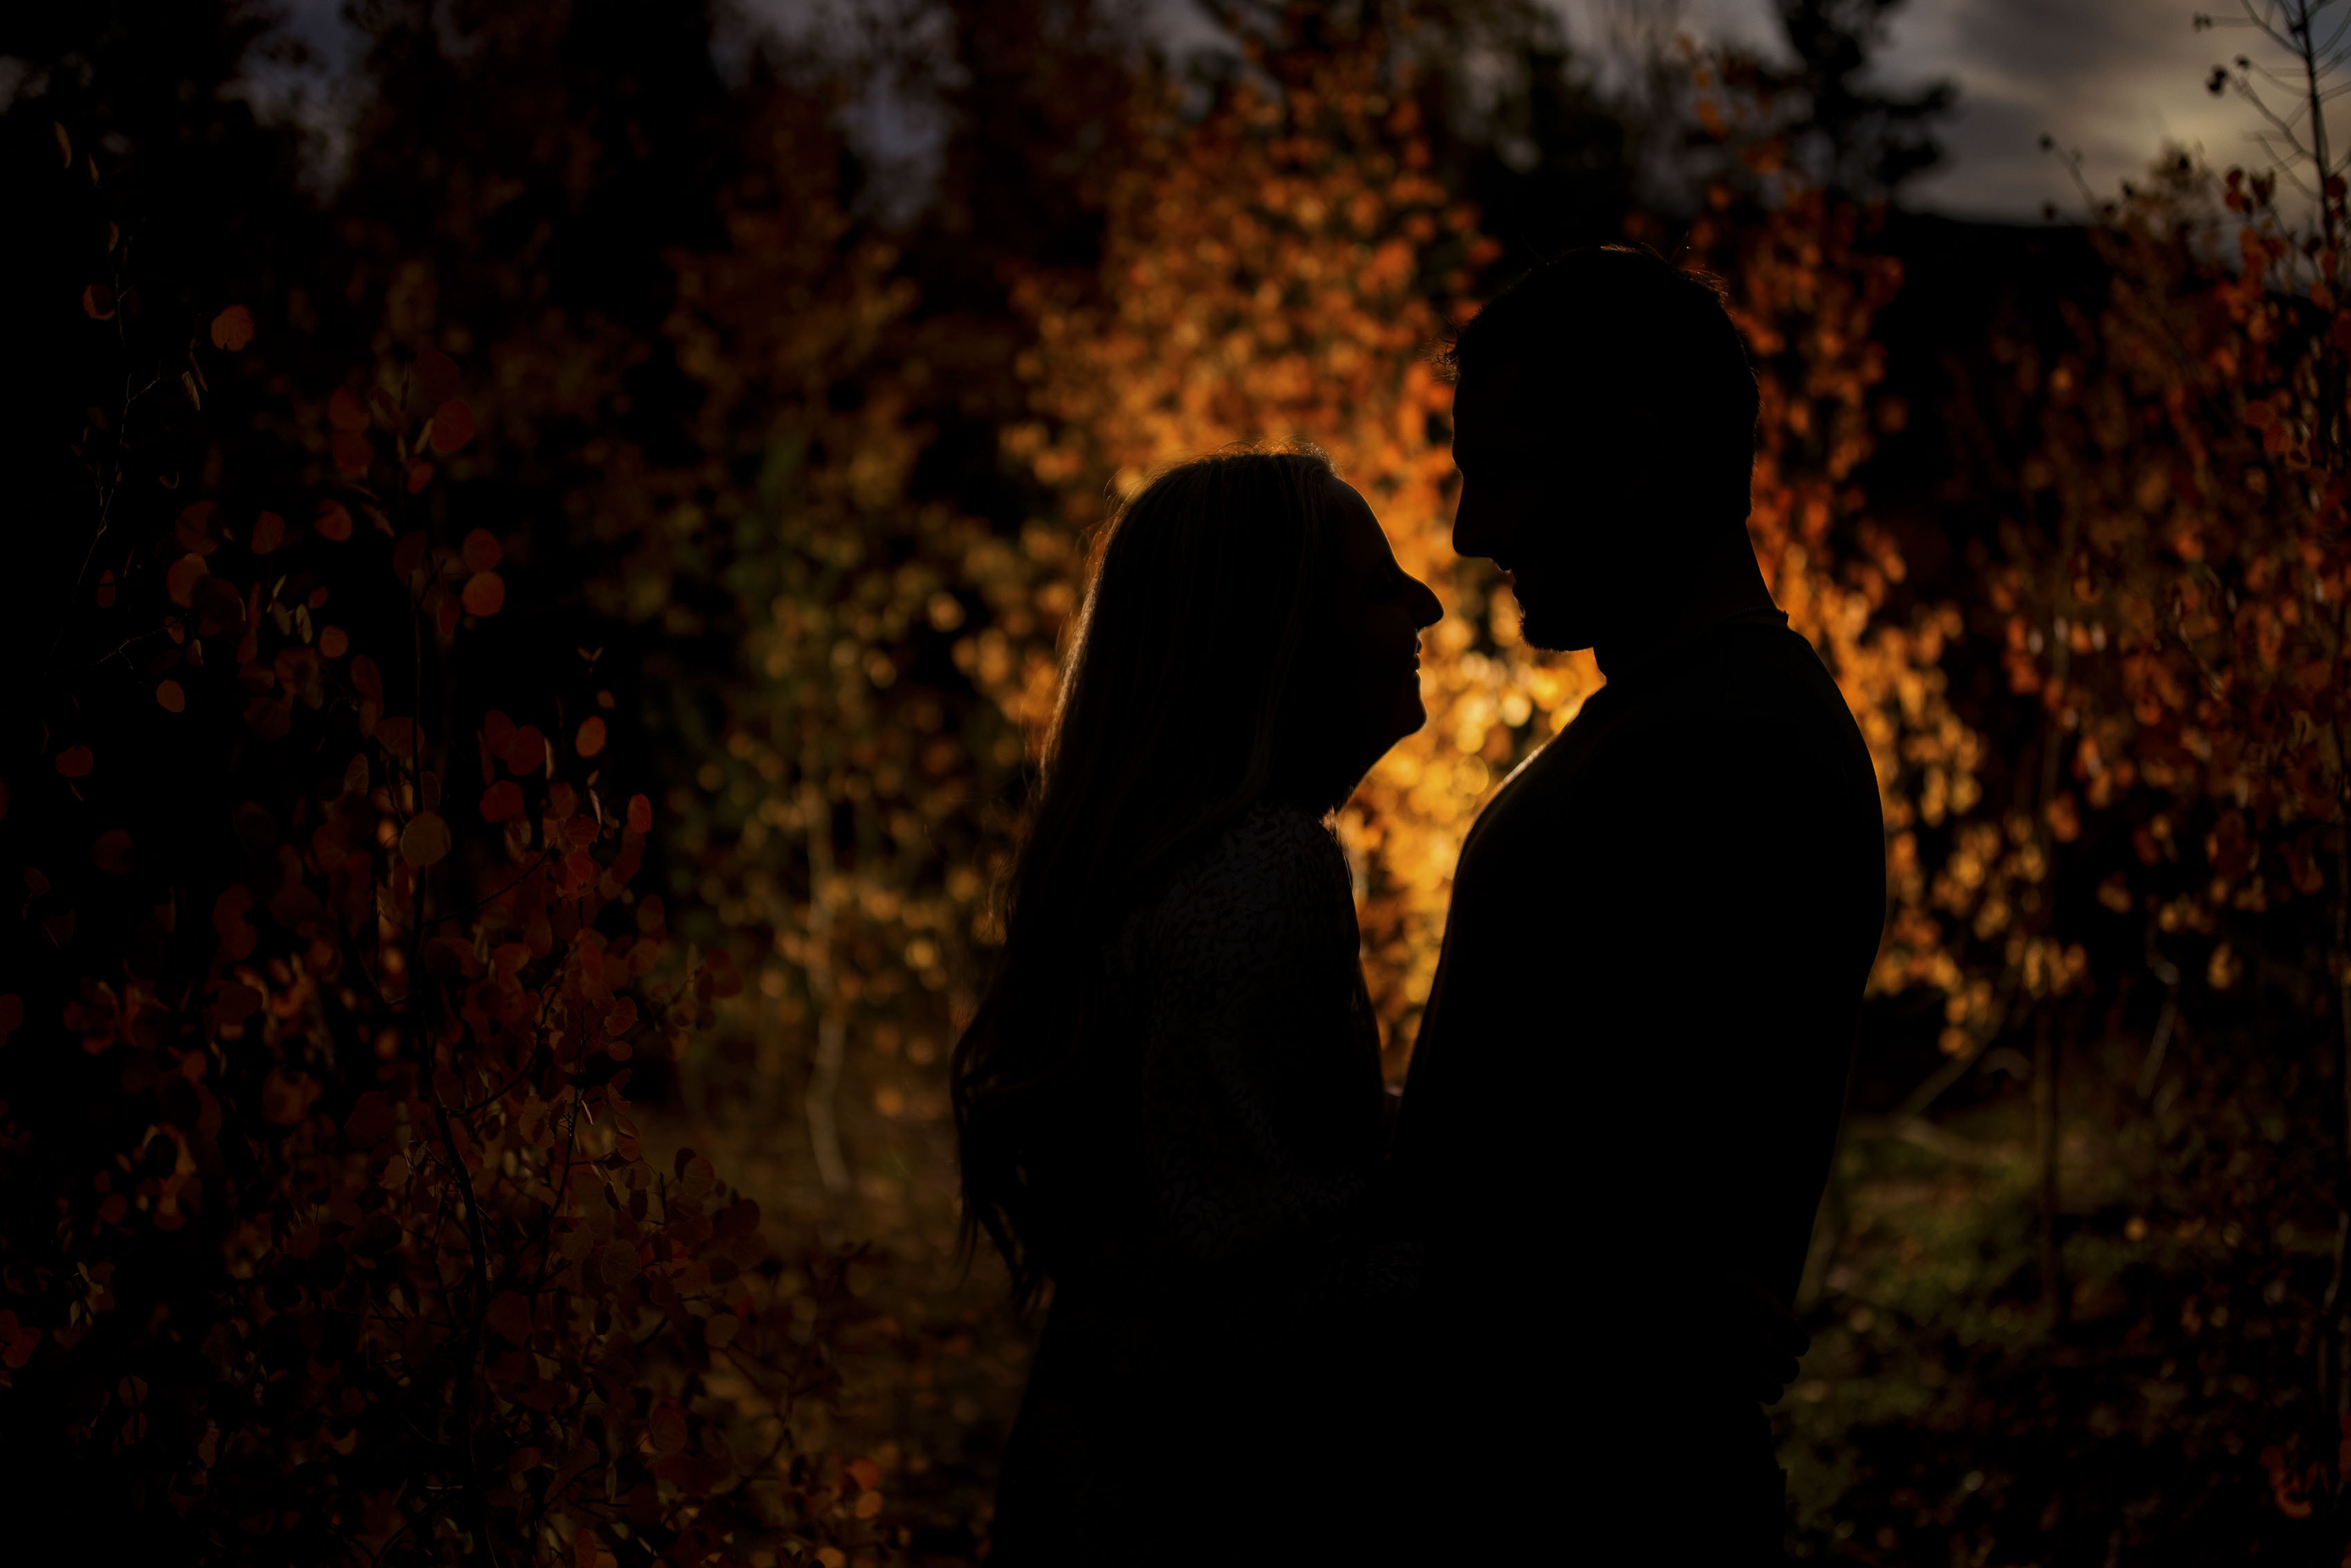 Two people are silhouetted against golden aspen trees in Colorado